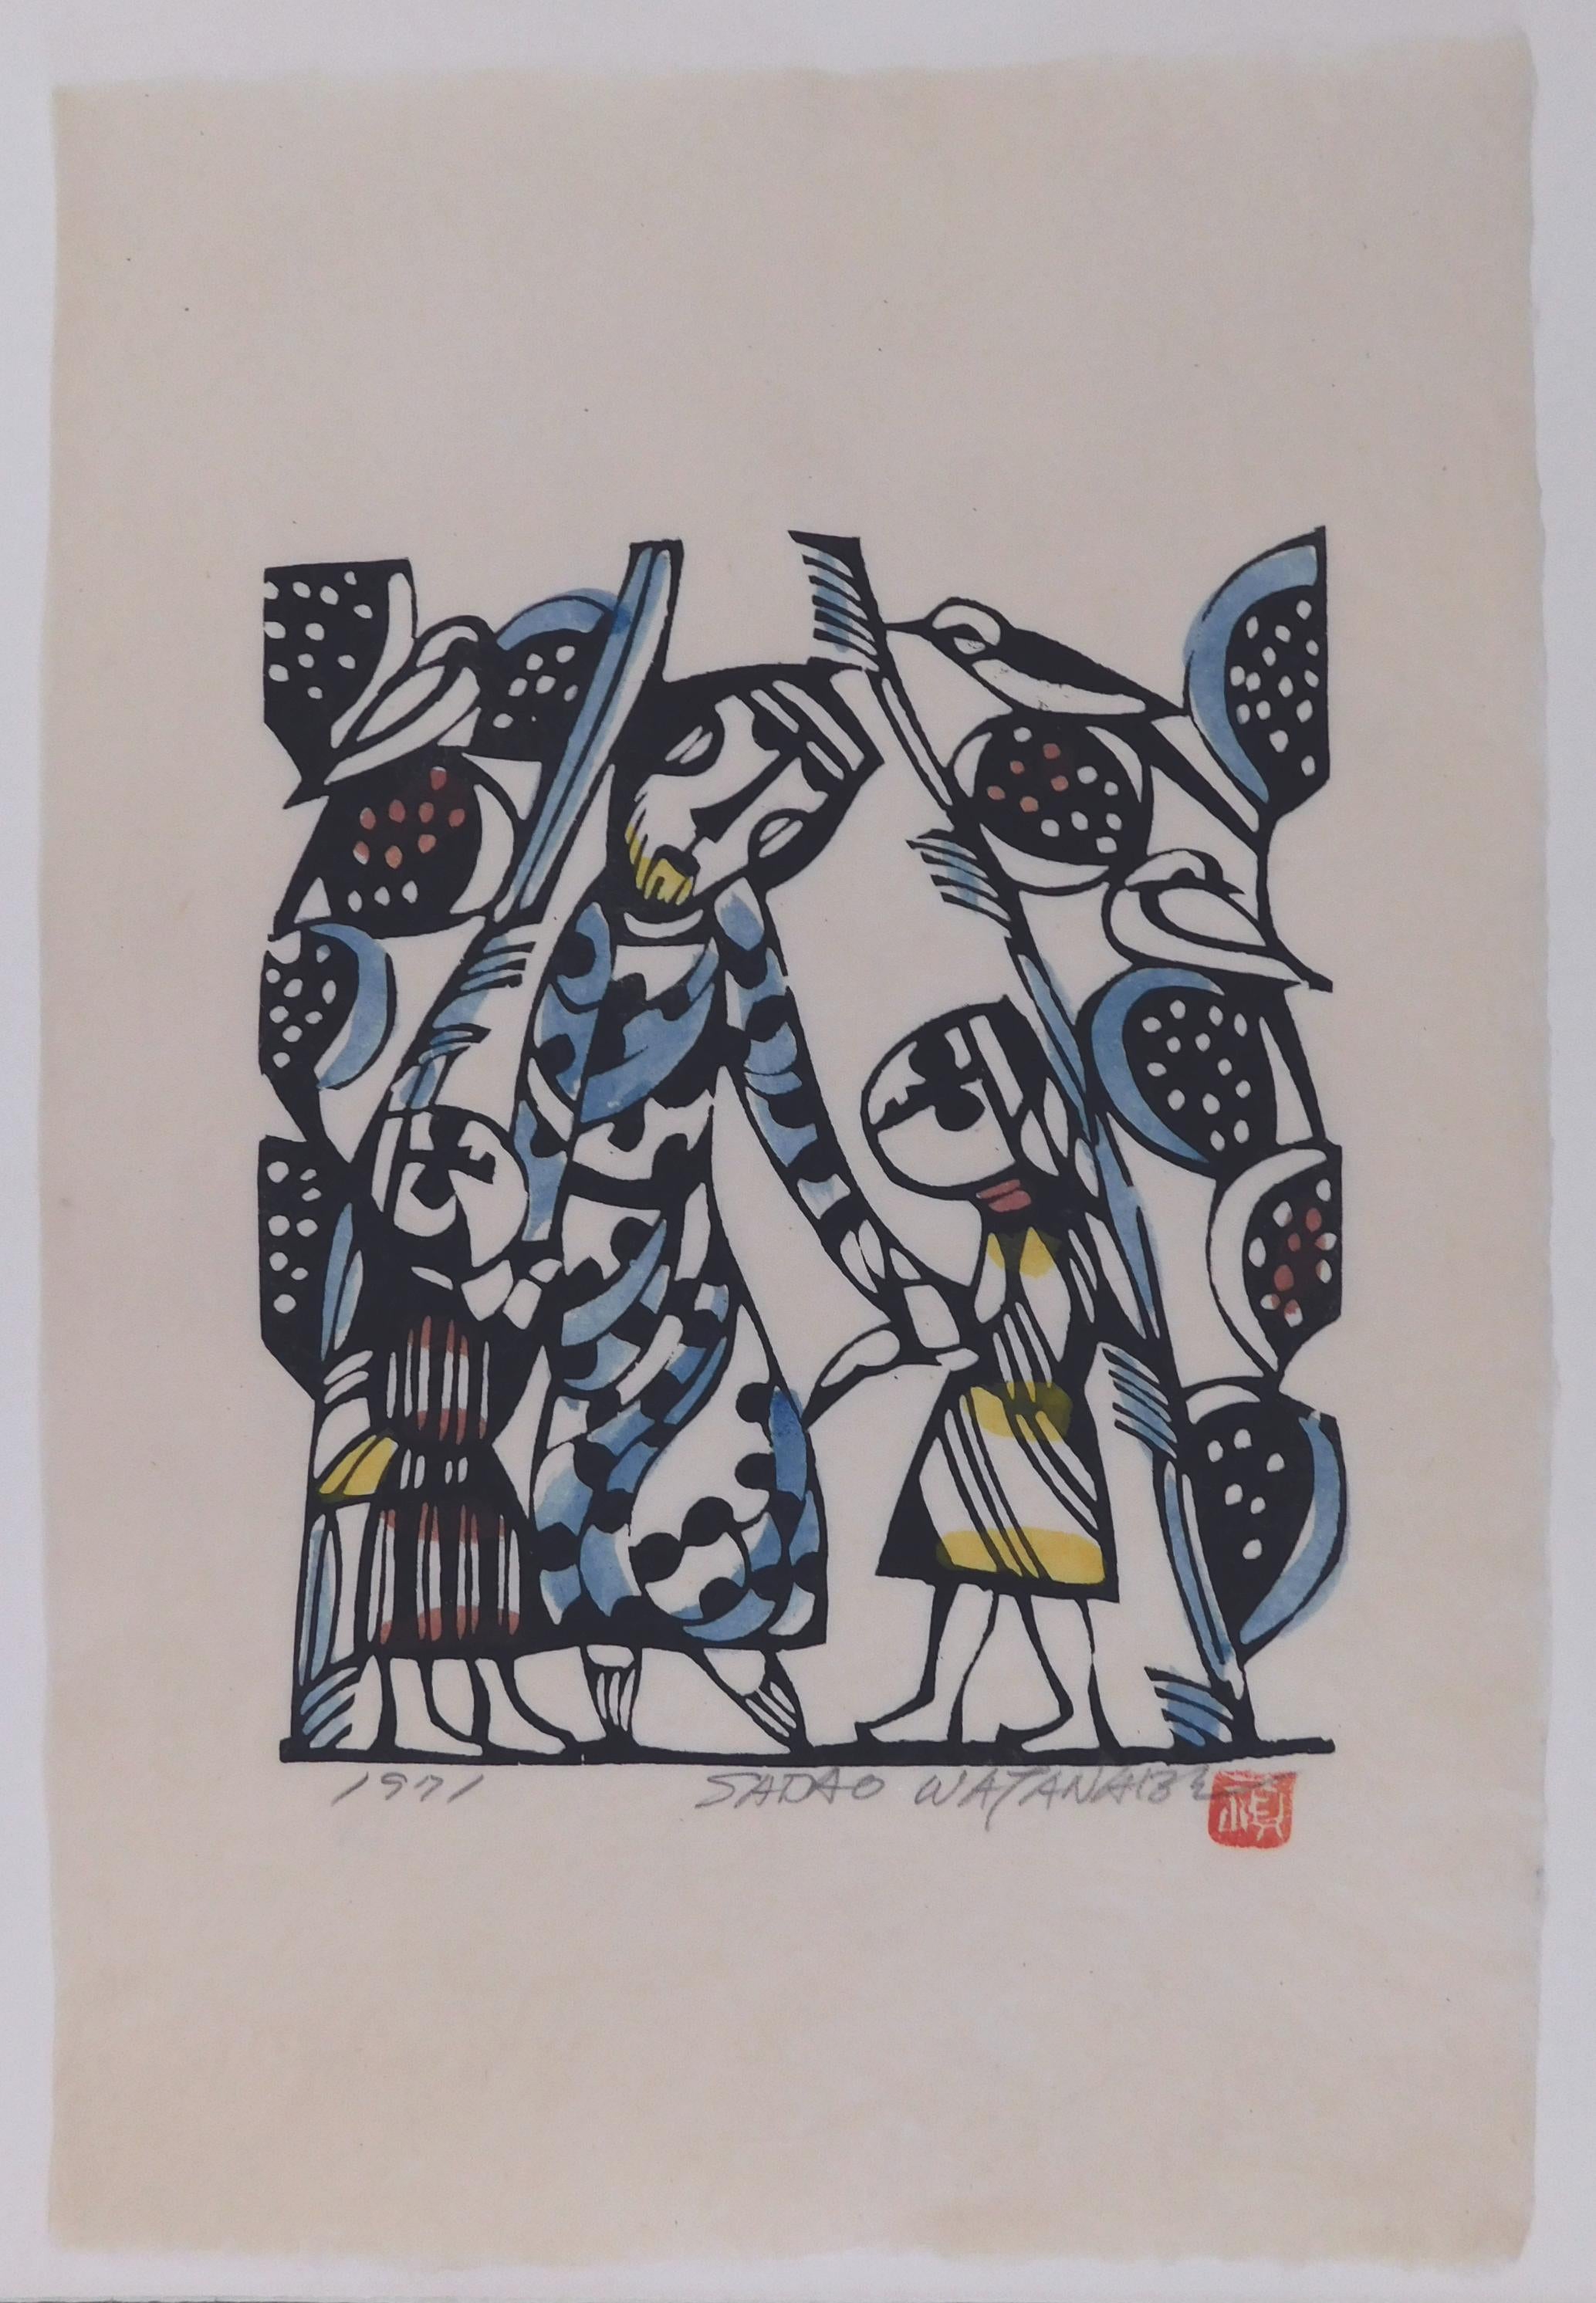 Stencil Print by Sadao Watanabe (1913-1996) on hand-made washi paper.
The image is of Jesus welcoming the children from Luke 18:15-17: “Suffer the
little children and forbid them not to come to me....”
Artist’s chop mark and pencil signature are